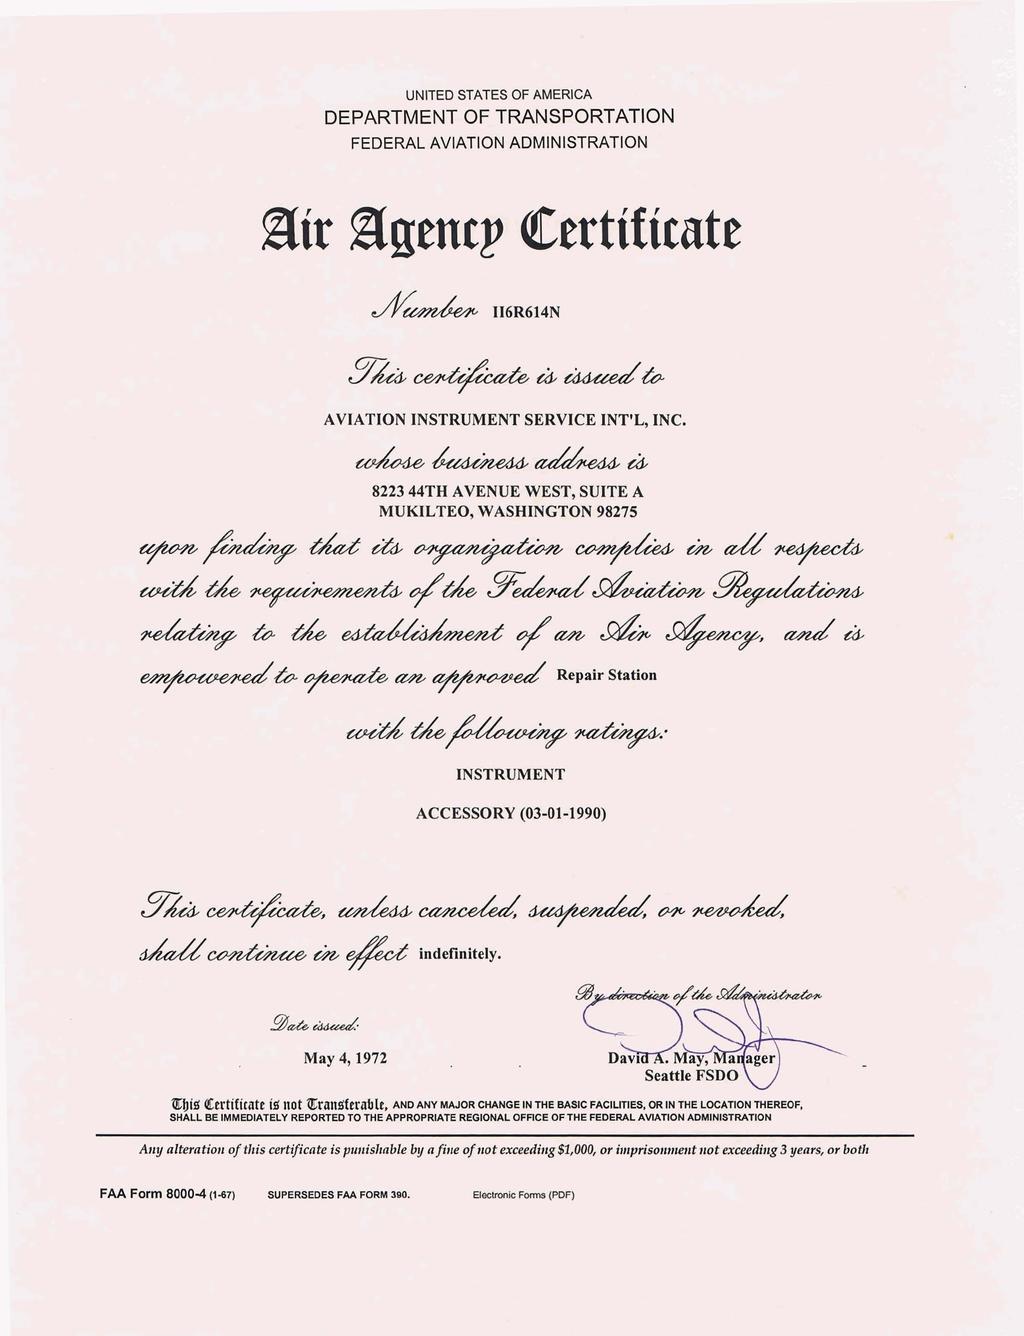 ' UNITED STATES OF AMERICA DEPARTMENT OF TRANSPORTATION FEDERAL AVIATION ADMINISTRATION air ggerrcp Certificate AVIATION INSTRUMENT SERVICE INT'L, INC.